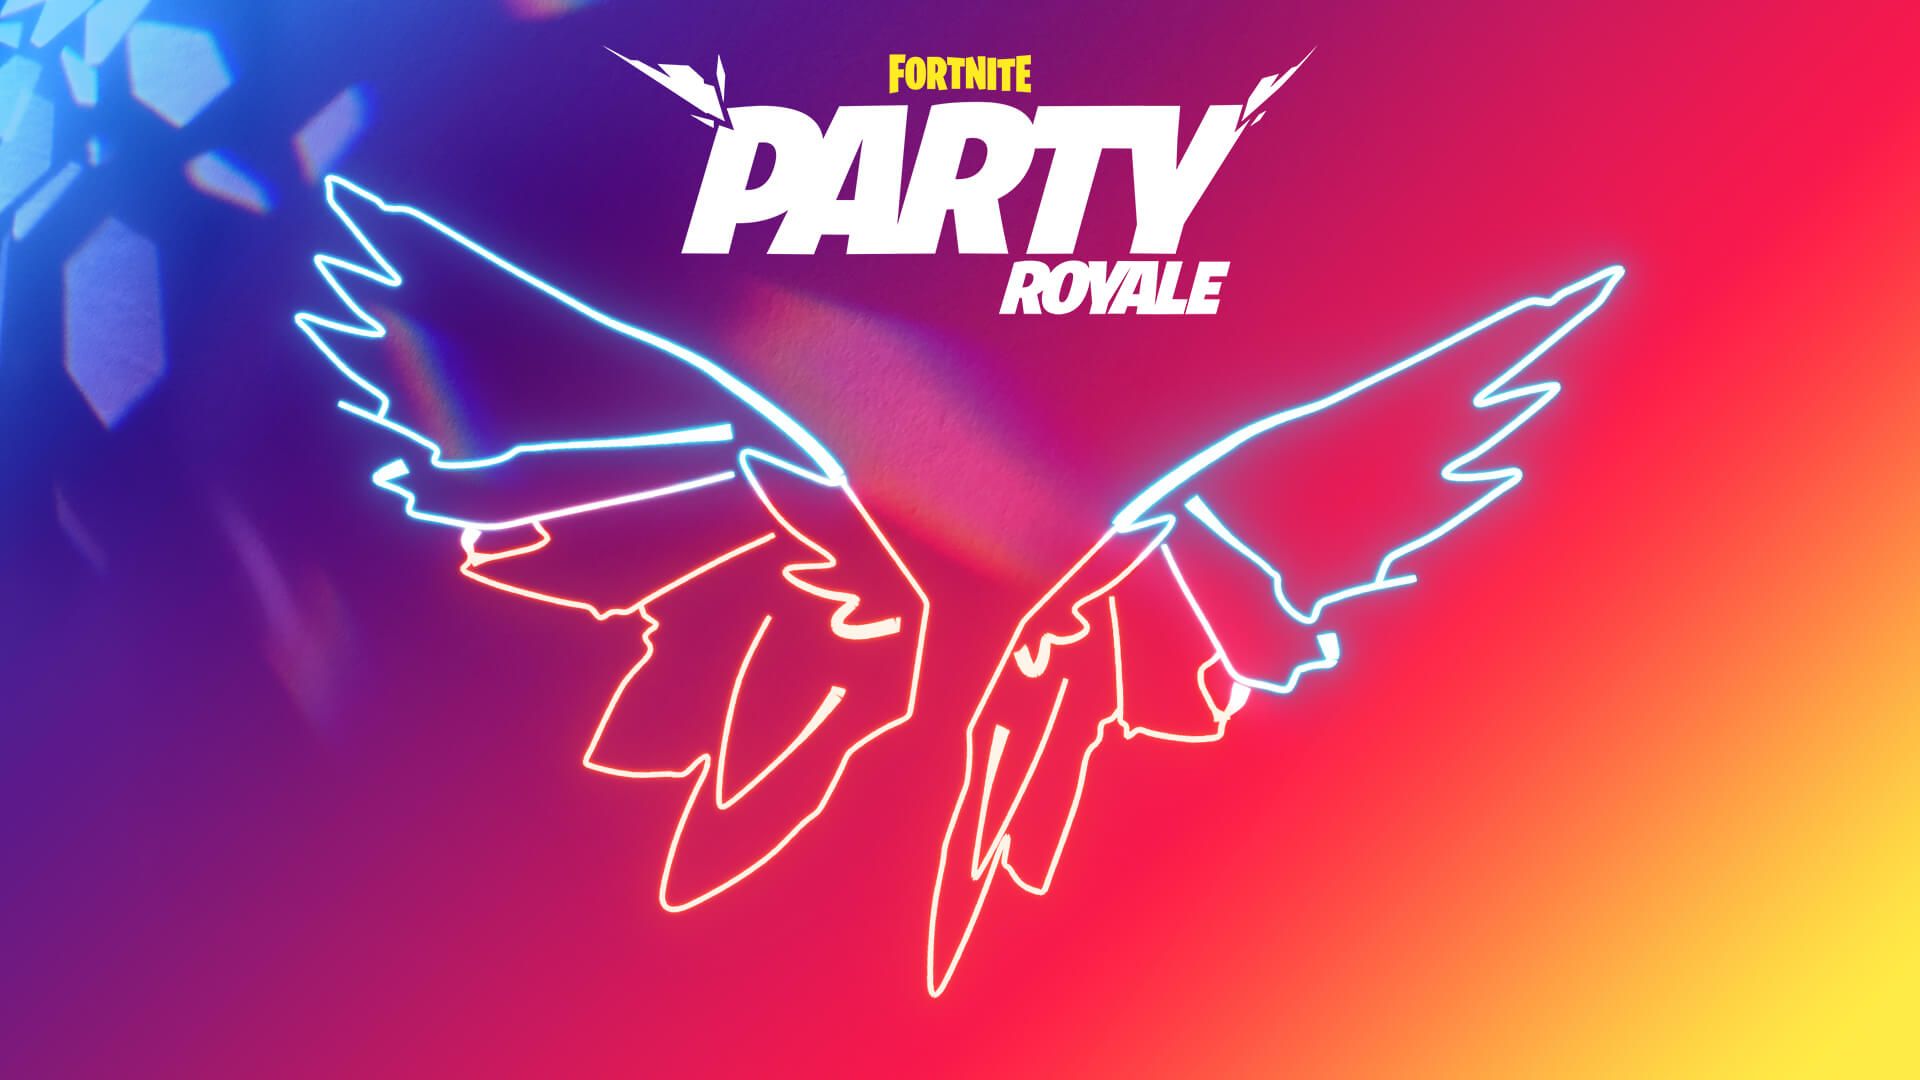 Dillon Francis, Steve Aoki, and deadmau5 Invite You to the Party Royale Premiere